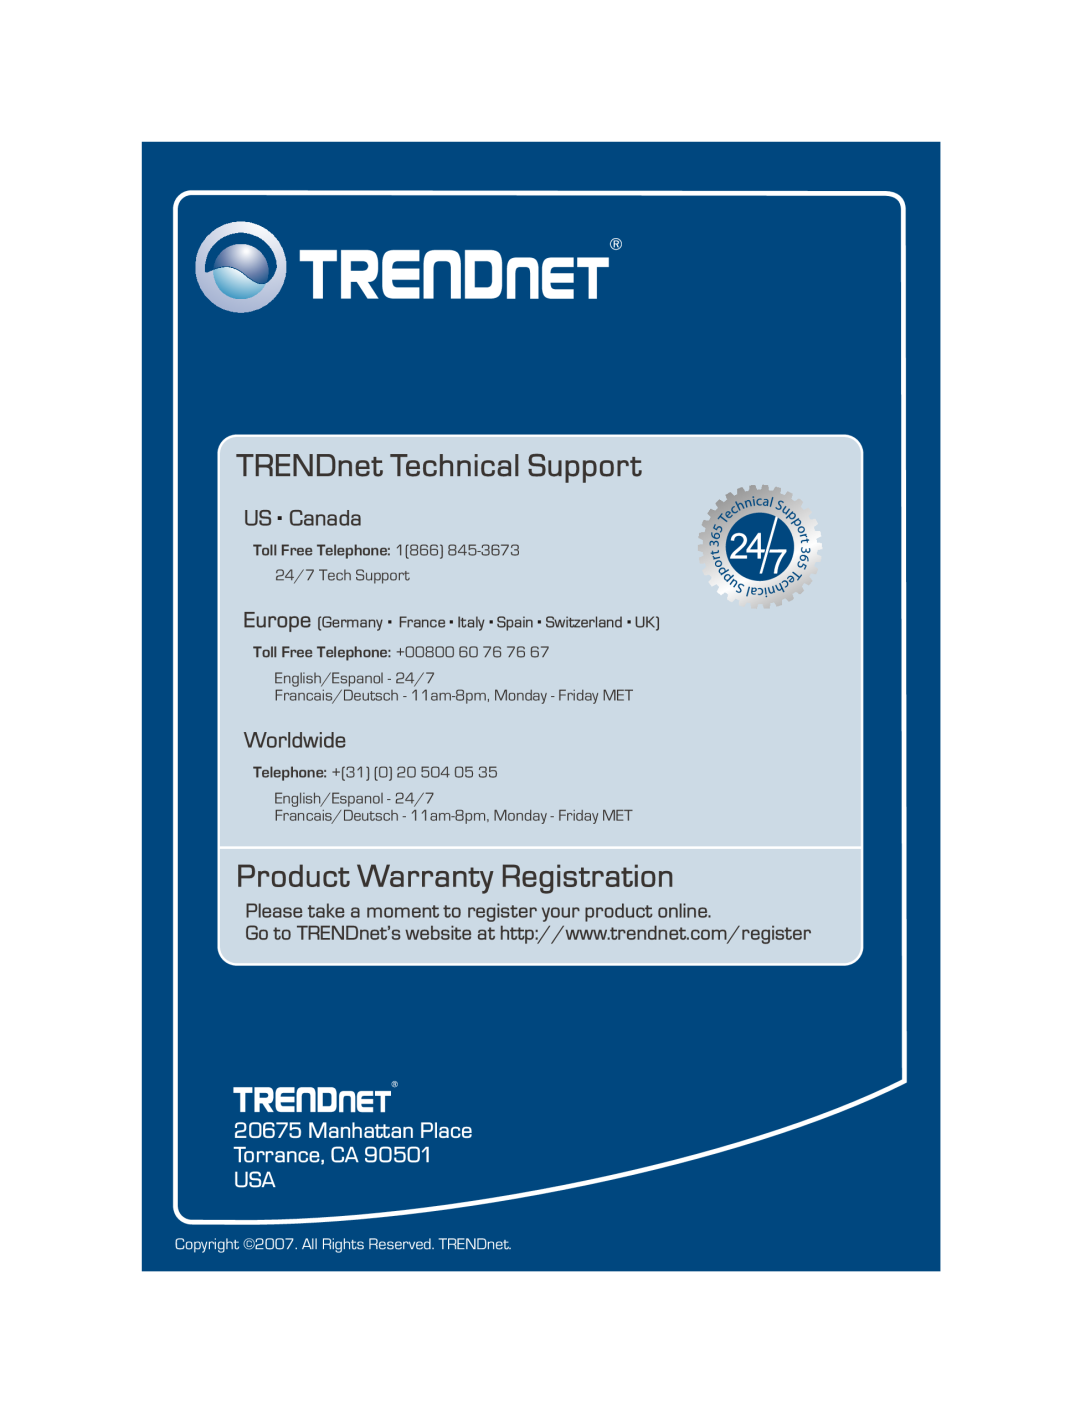 TRENDnet TPE-80WS Manhattan Place Torrance, CA USA, TRENDnet Technical Support, Product Warranty Registration, US . Canada 